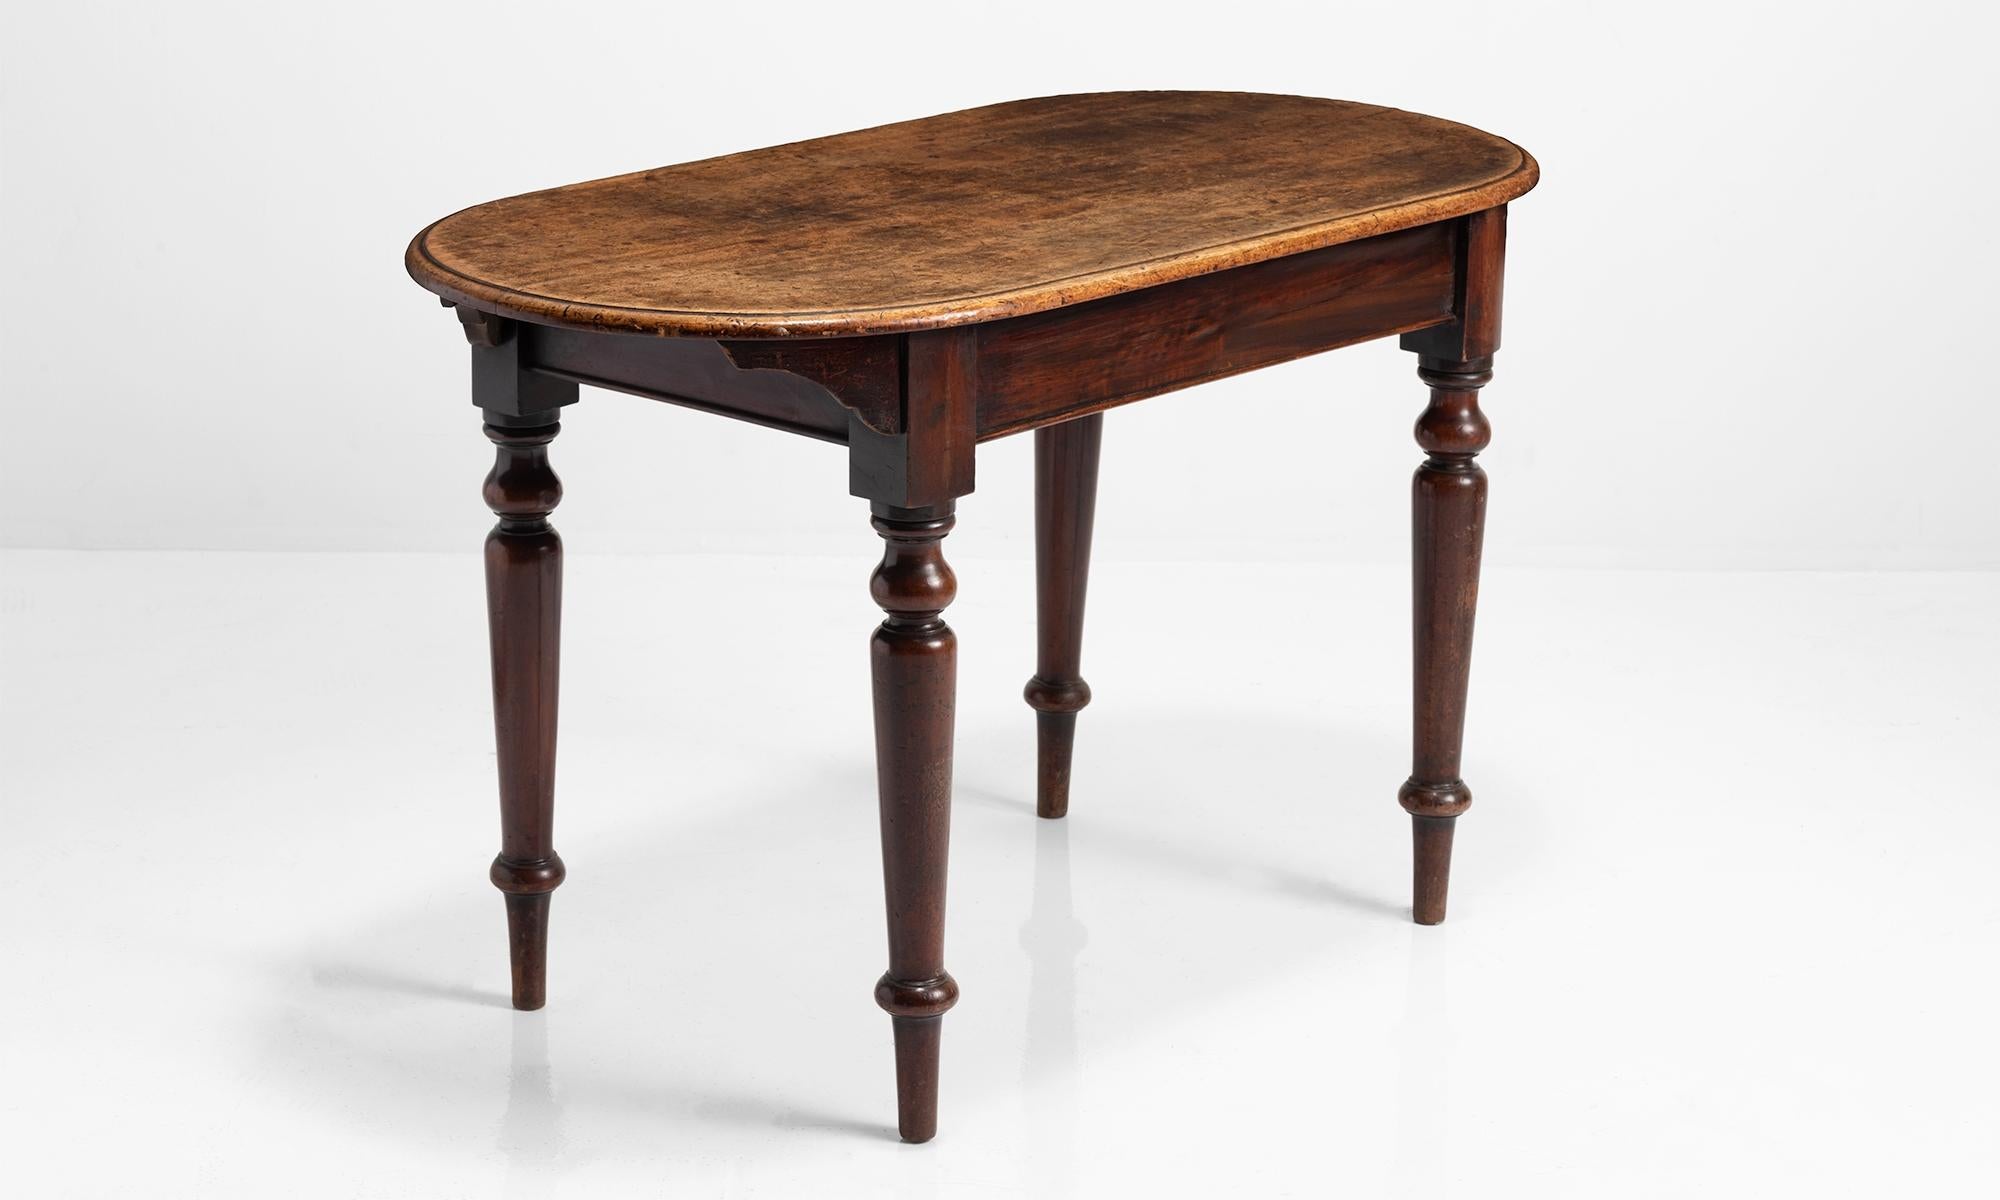 Mahogany Tavern table, England, 19th century.

Moulded mahogany tops with rounded ends on turned legs.